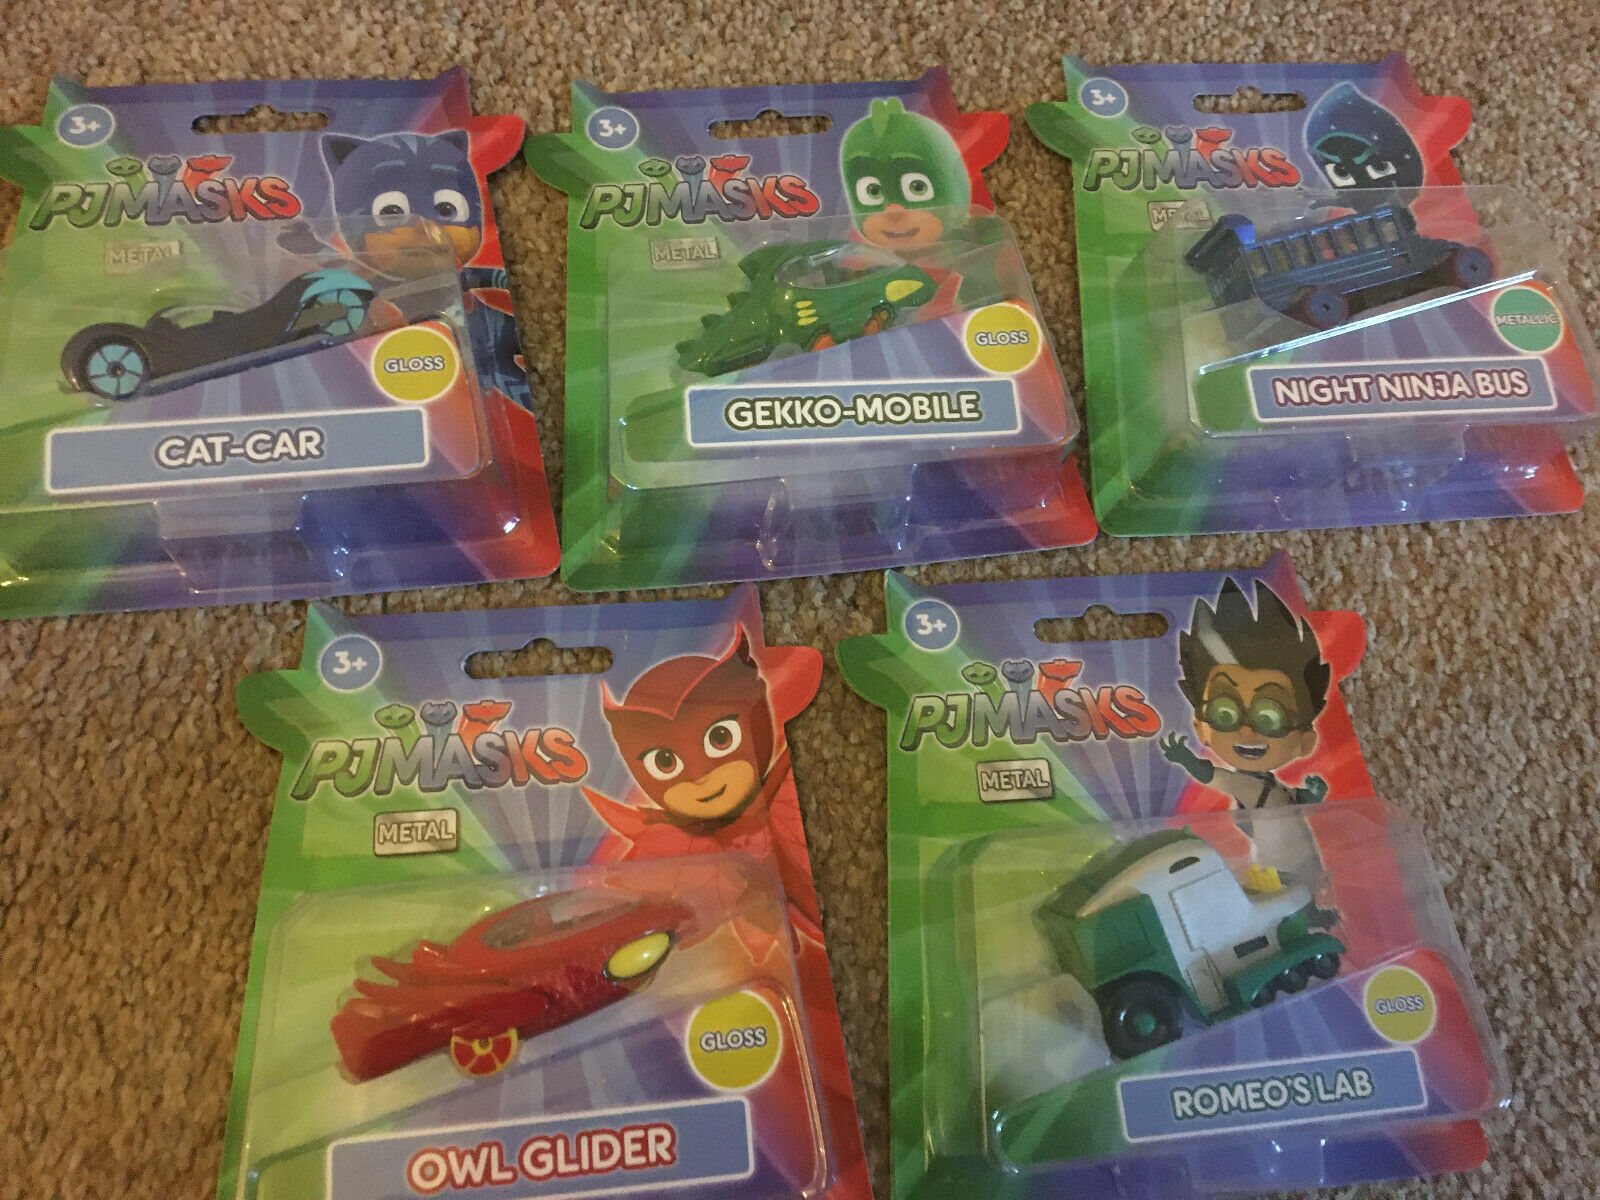 PJ Masks Vehicle Metal Car Diecast Collectable Toy New Teamsterz Tv Show Kids 